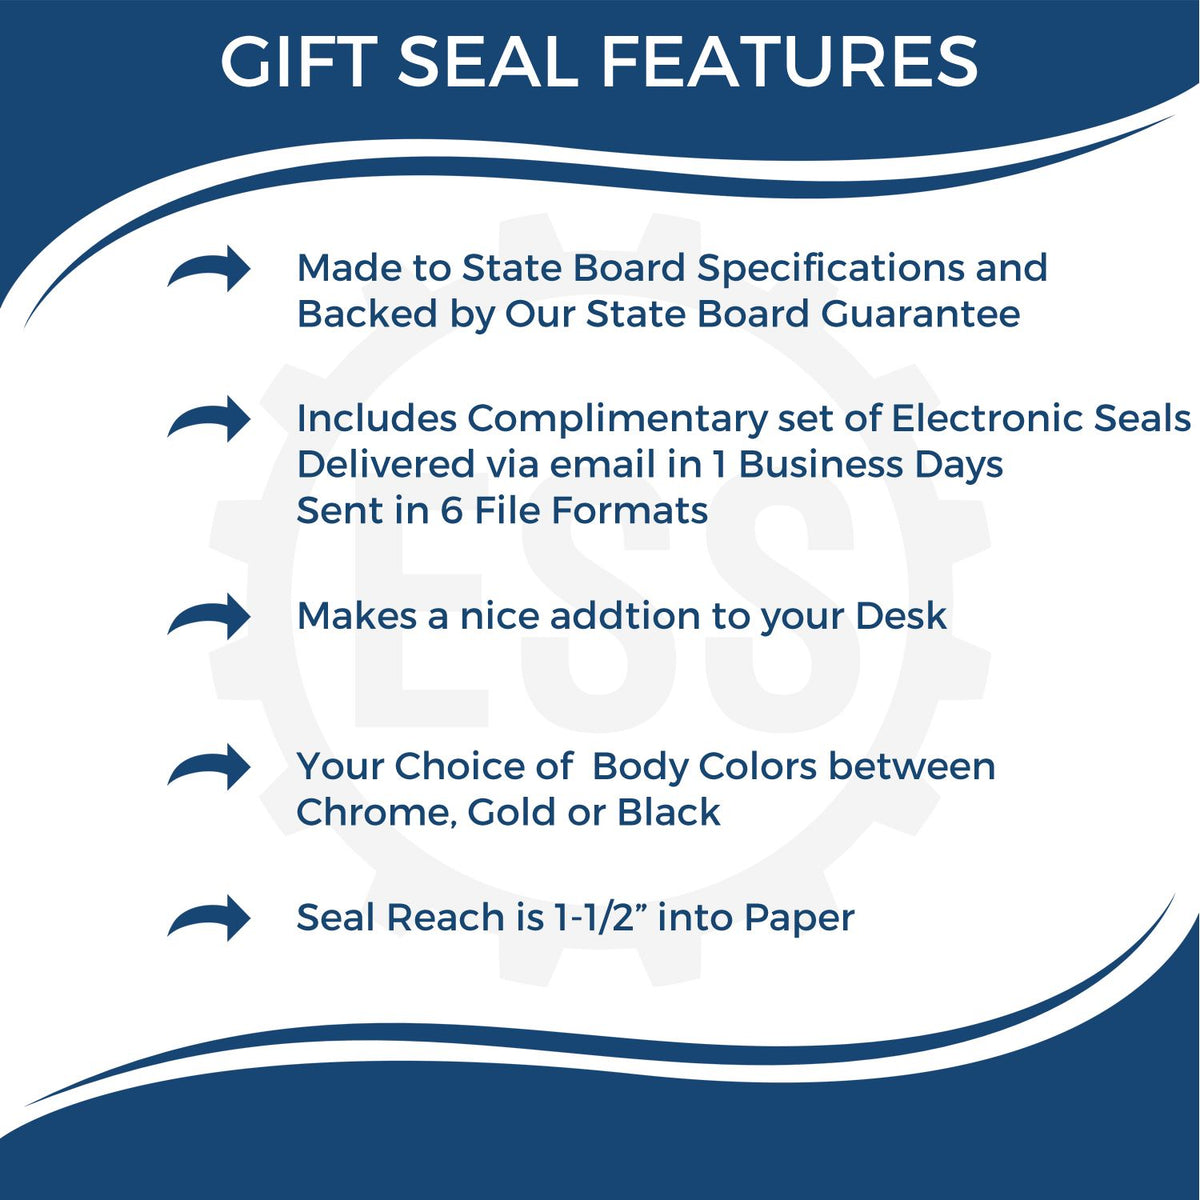 A picture of an infographic highlighting the selling points for the Gift Hawaii Architect Seal